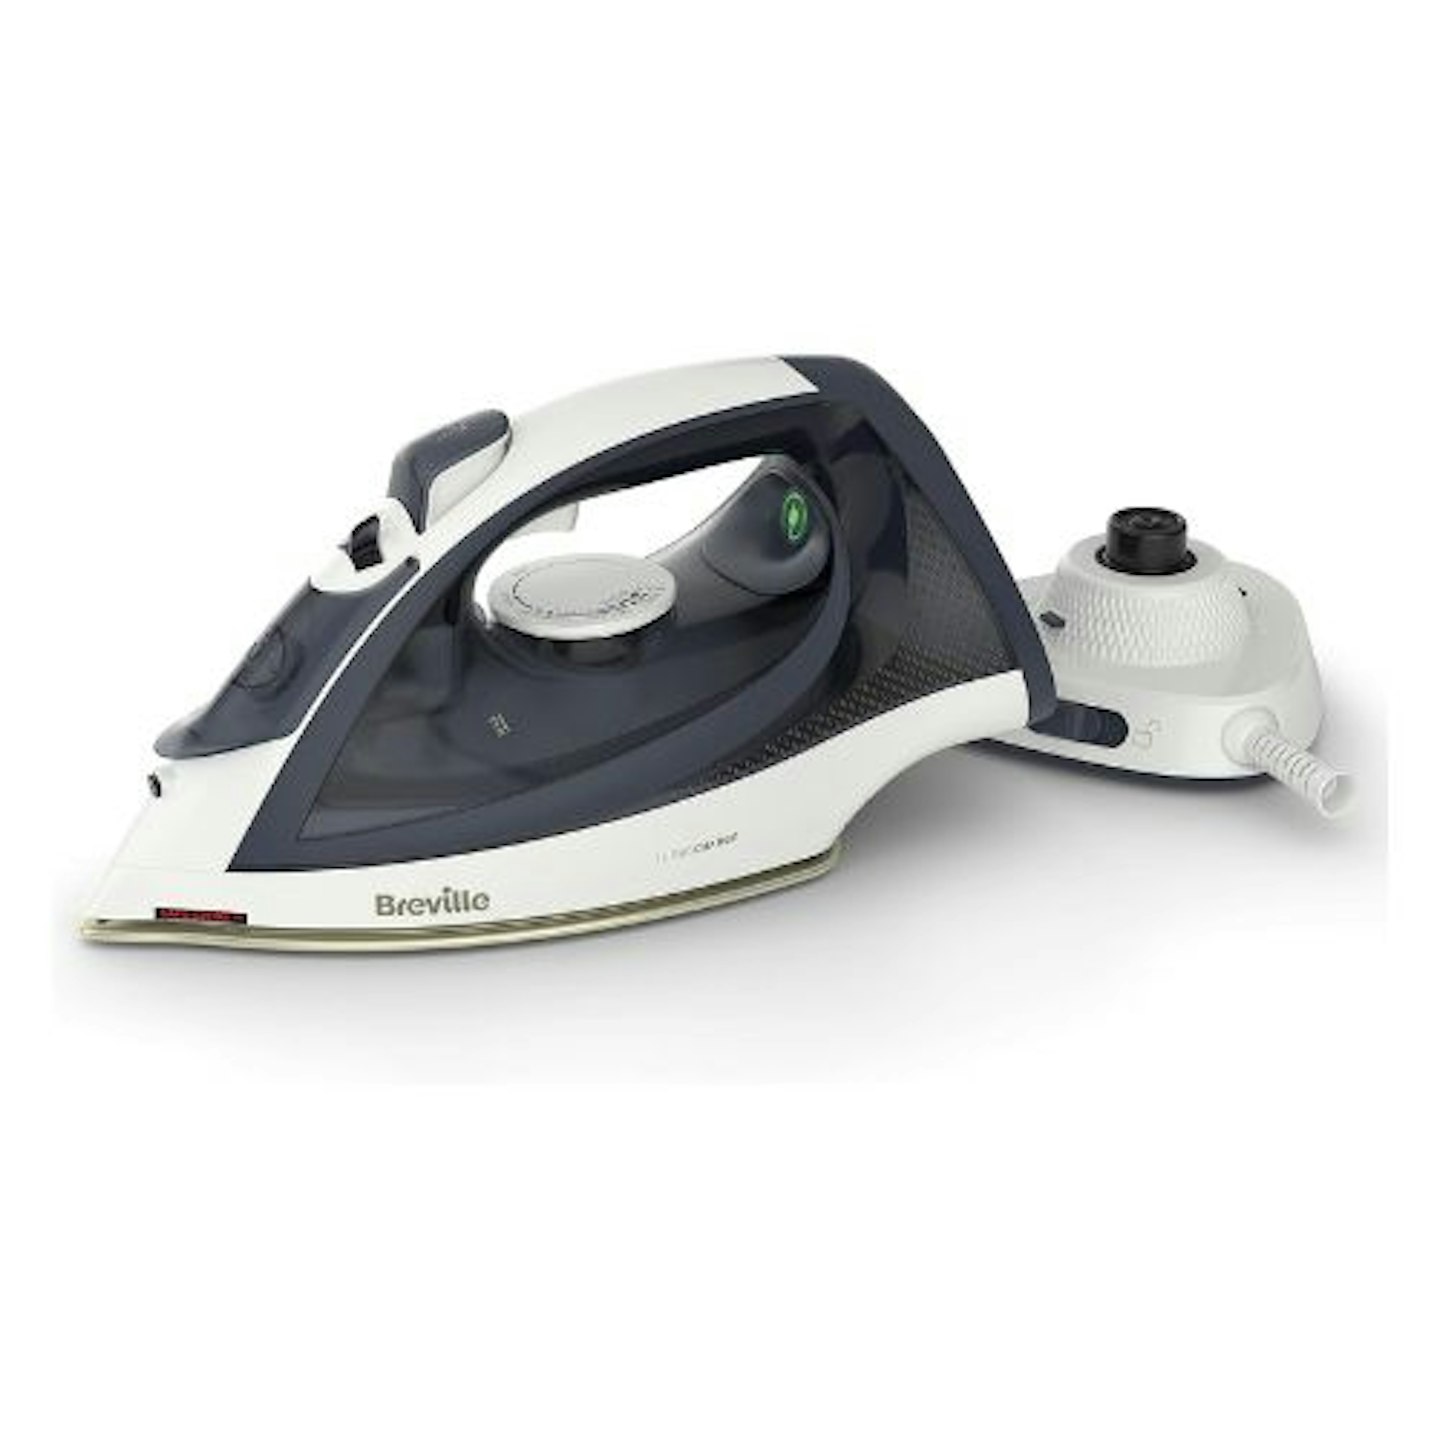  Breville Turbo Charge Cordless Iron